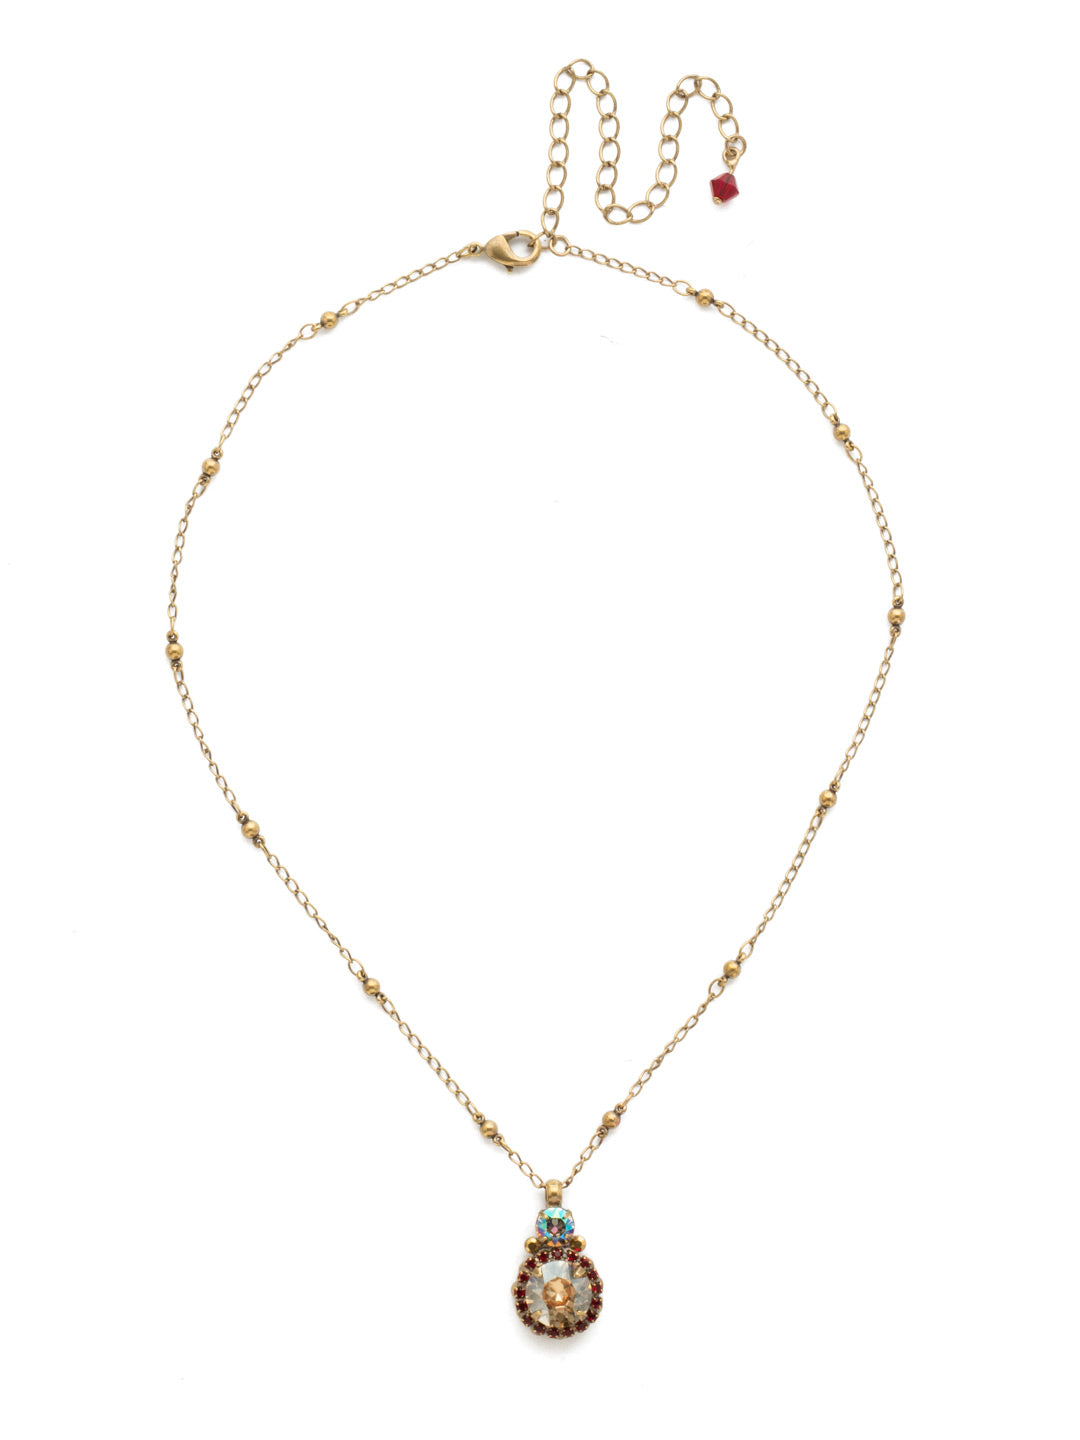 Embellished Rivoli Pendant Necklace - NDU44AGGGA - <p>A central round rivoli cut crystal is encircled with delicate rhinestones and embellished with petite circular stones. From Sorrelli's Go Garnet collection in our Antique Gold-tone finish.</p>